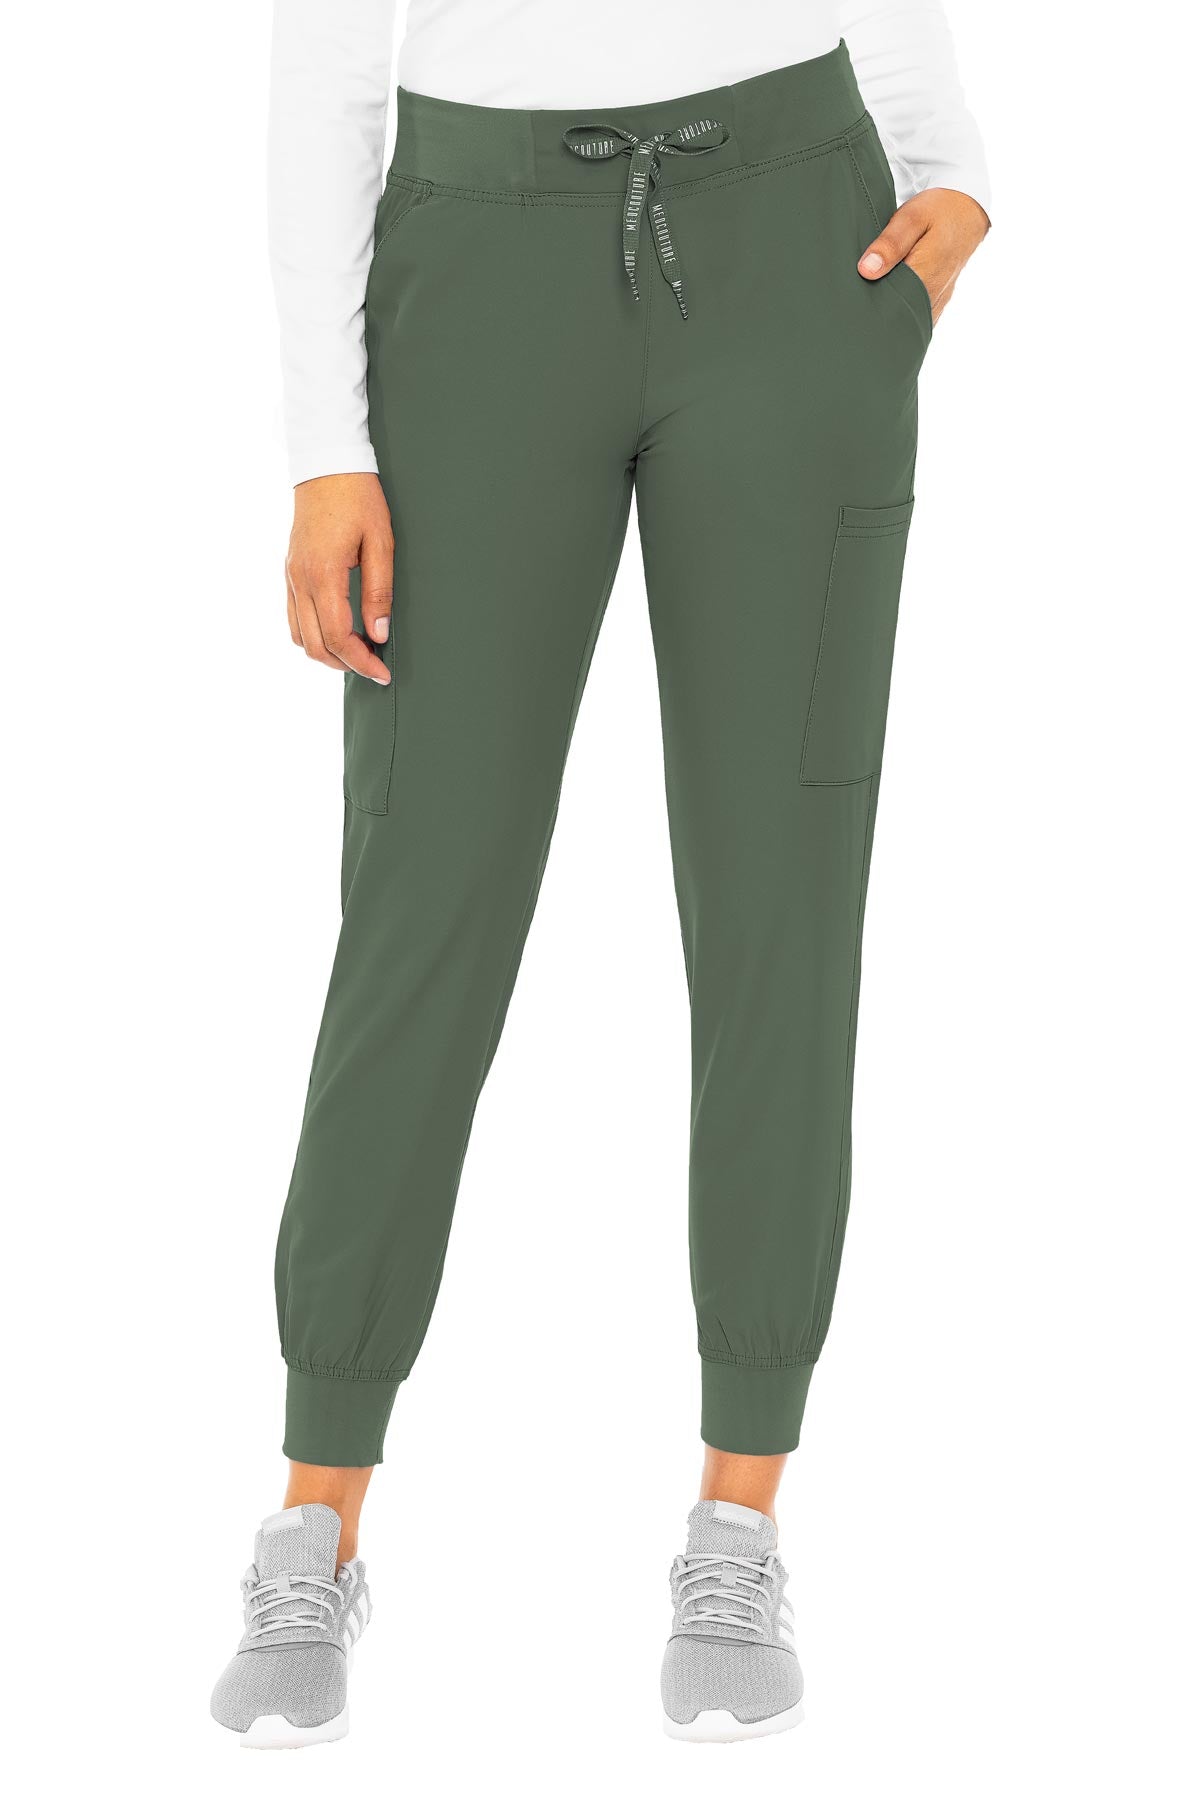 Med Couture Petite Scrub Pants Insight Jogger Pant in Olive at Parker's Clothing and Shoes.